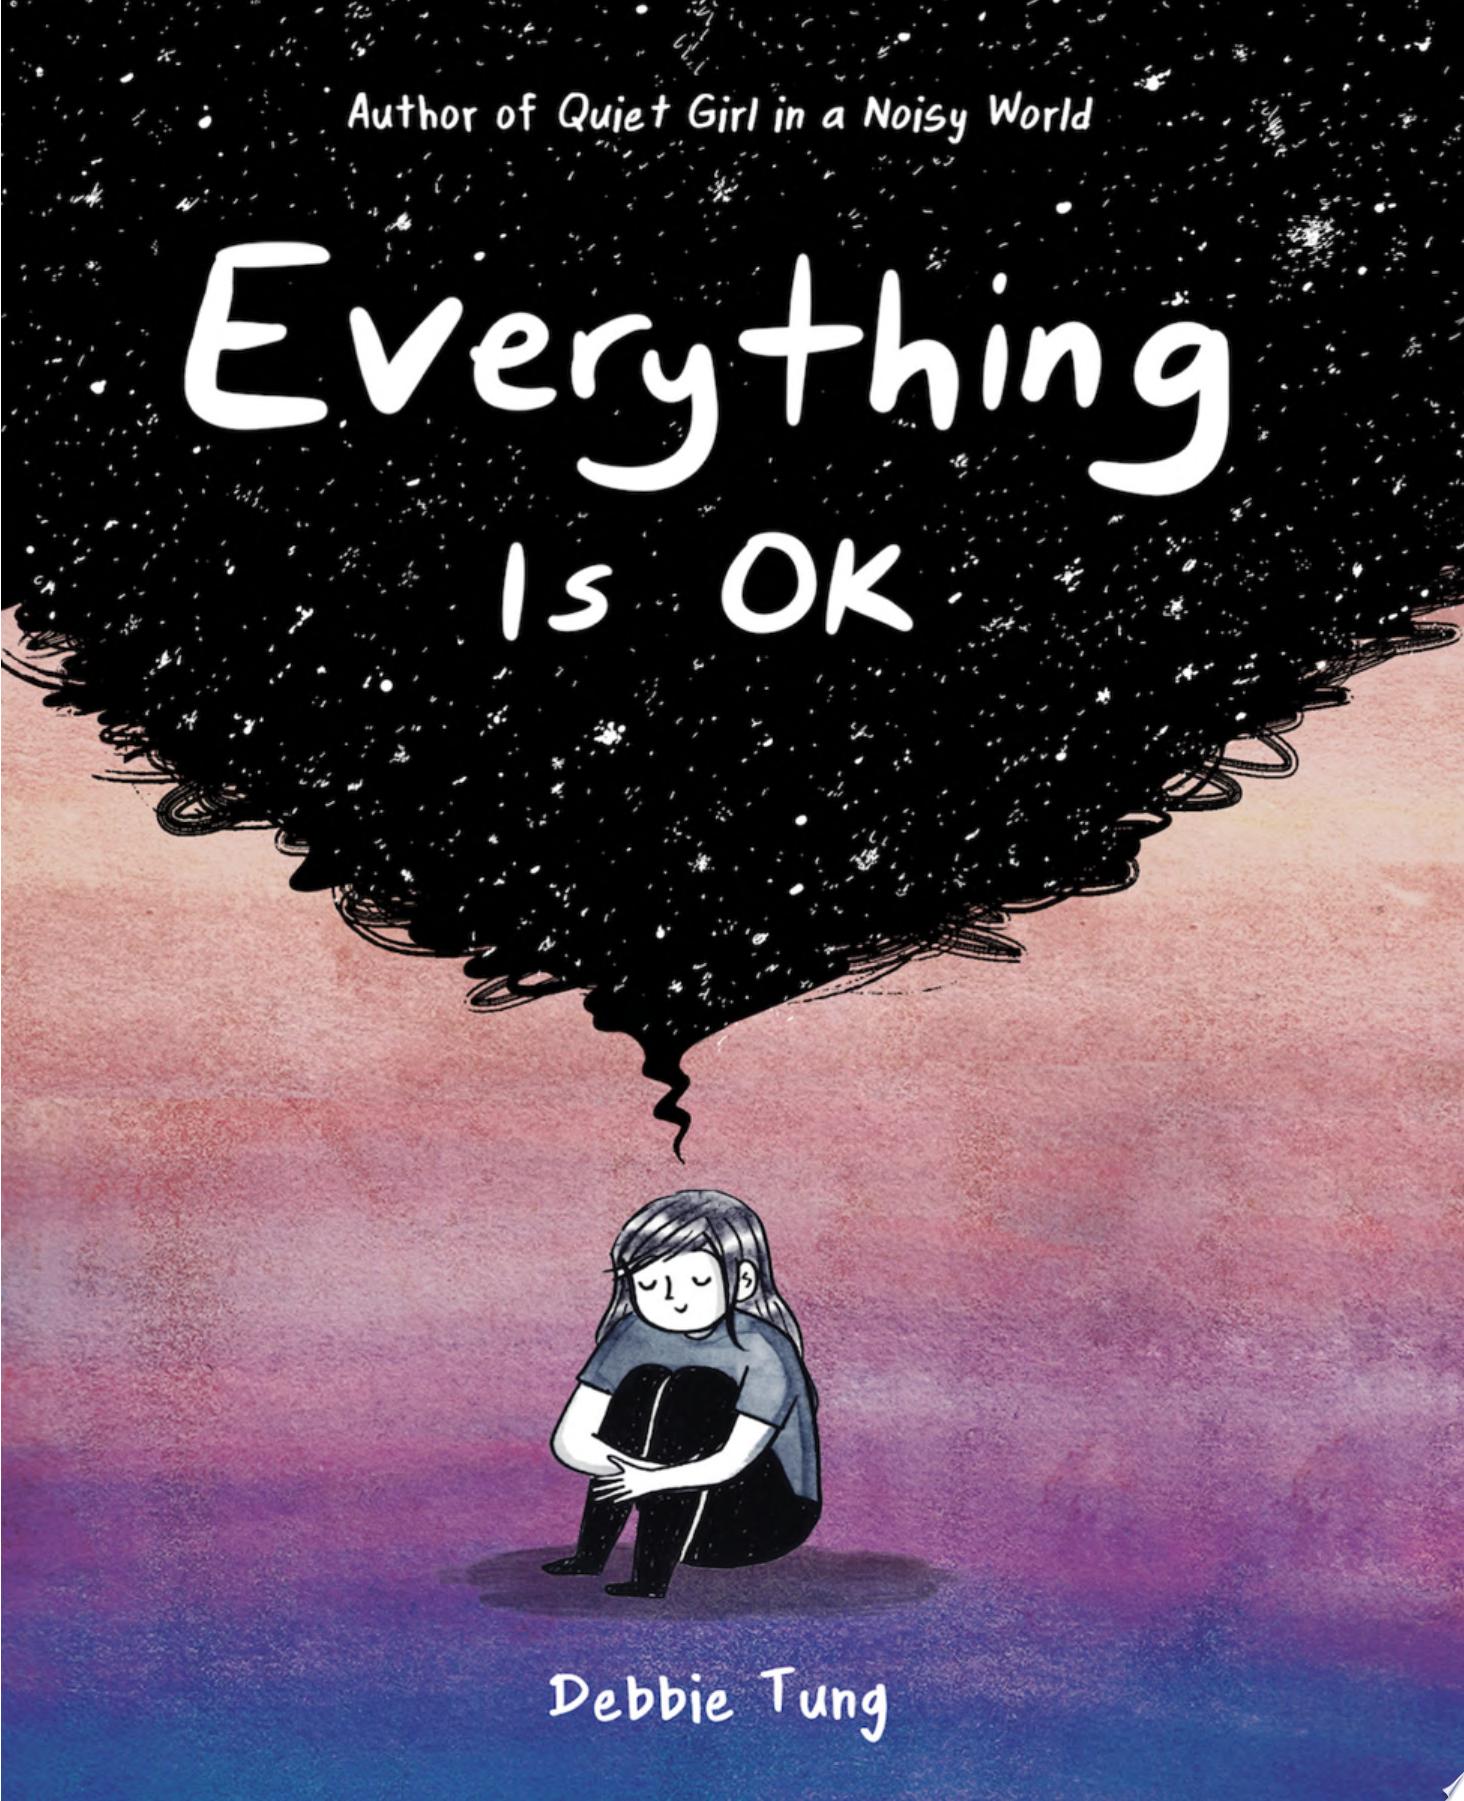 Image for "Everything Is OK"